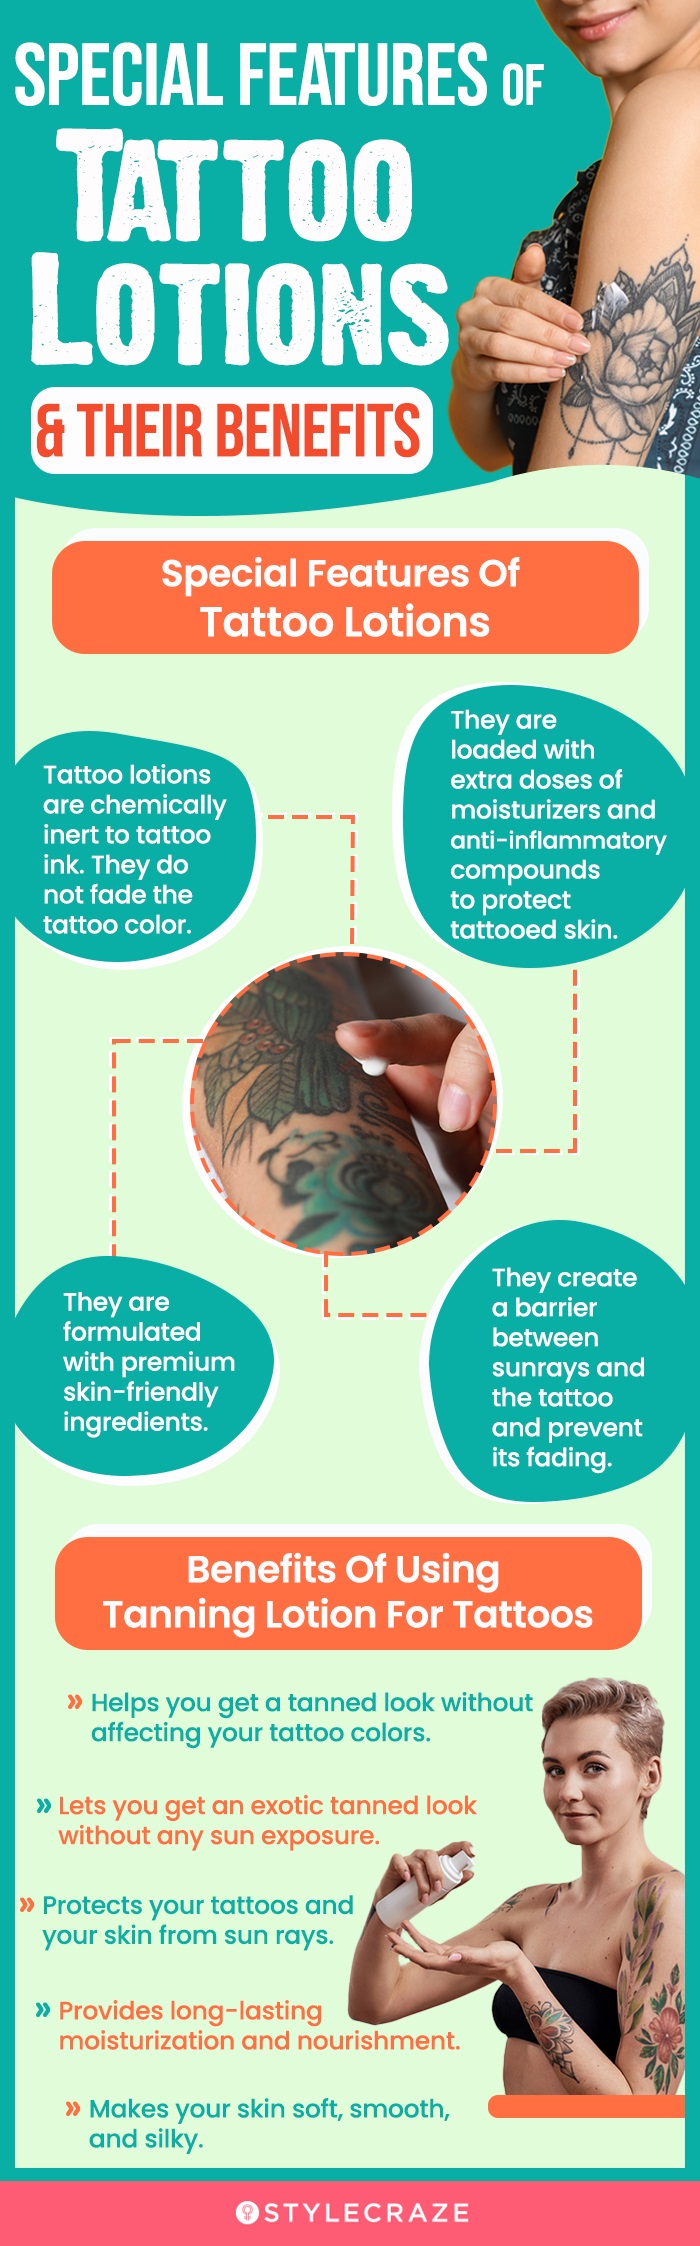 Special Features Of Tattoo Lotions & Their Benefits [infographic]